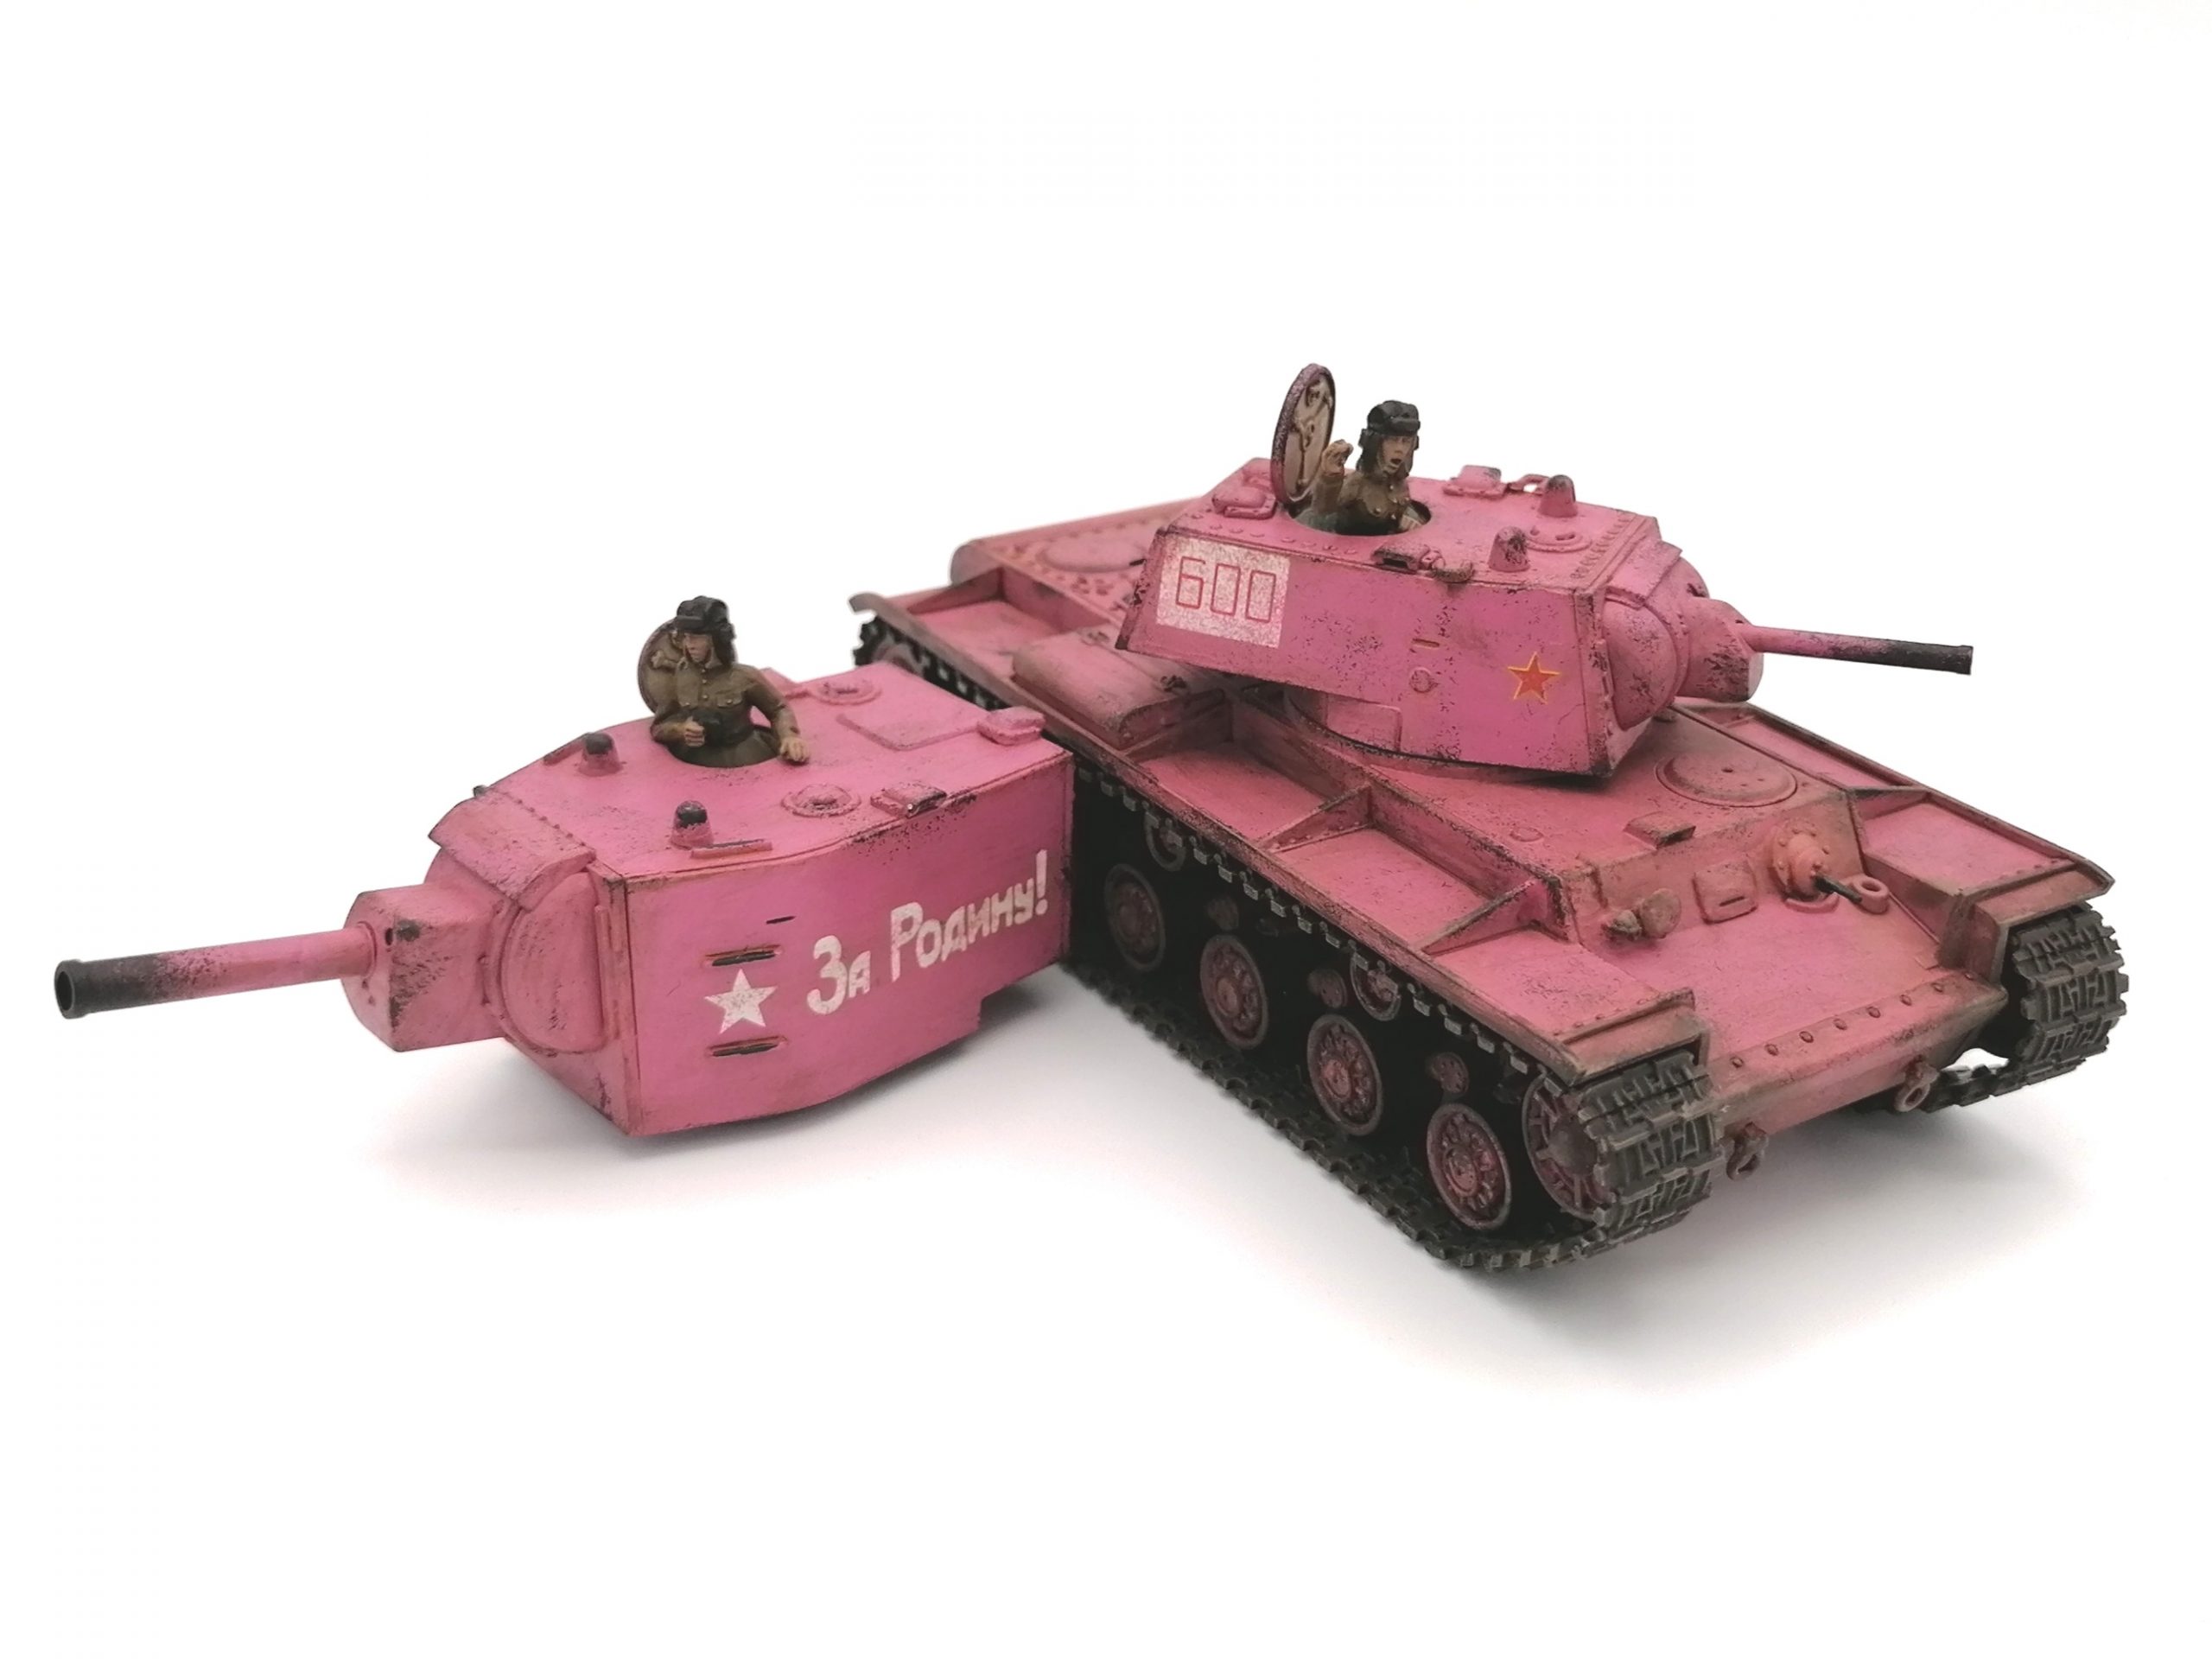 Think Pink! Raising Awareness with an Unconventional KV-1/KV-2